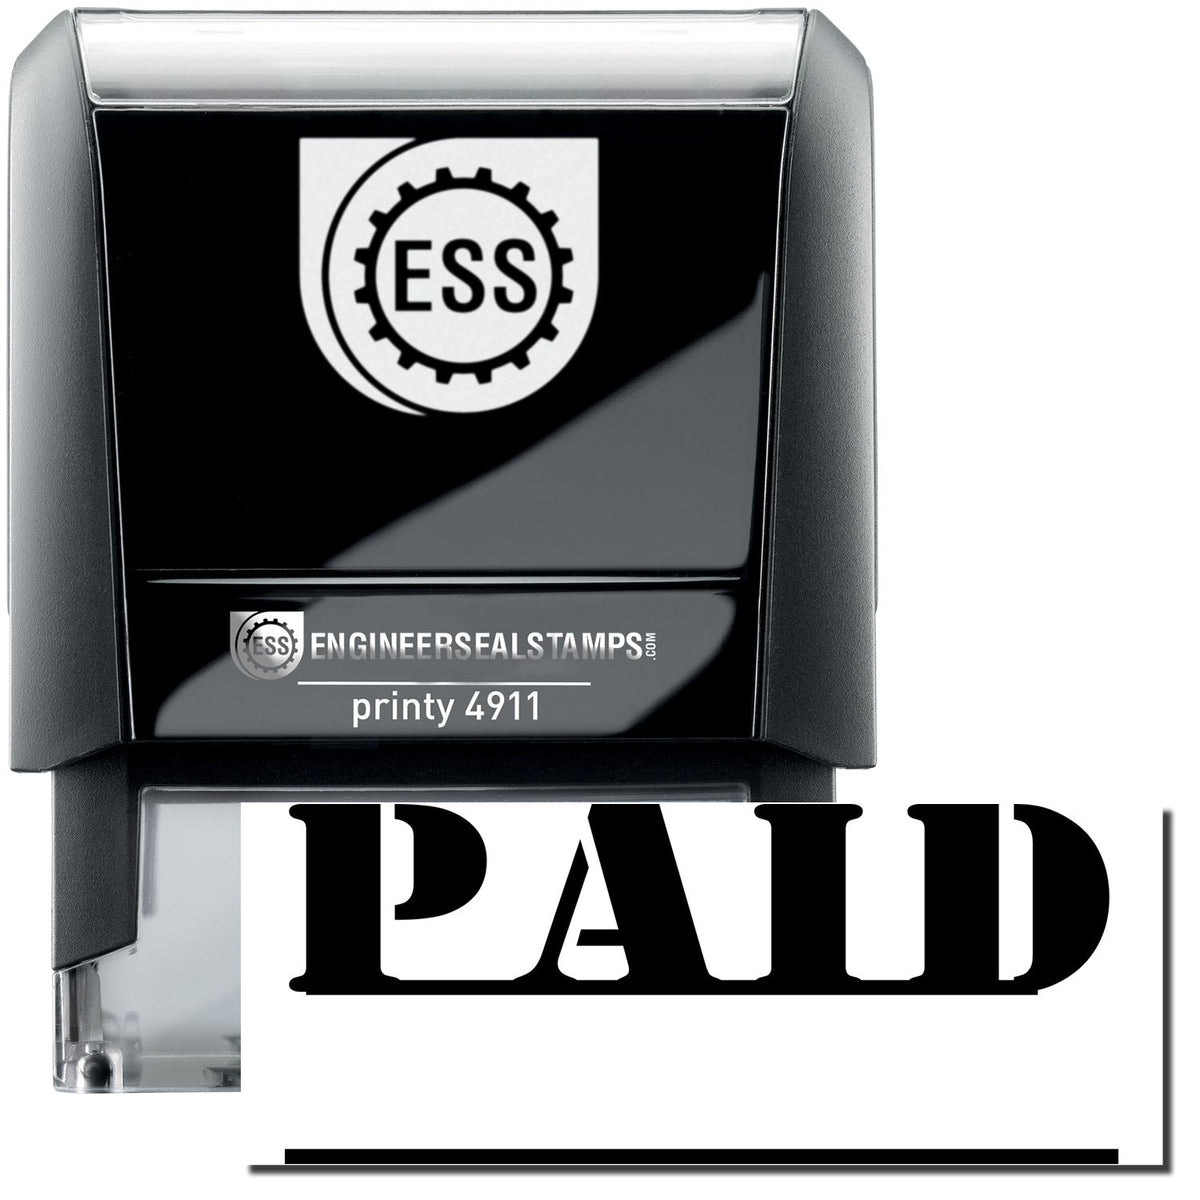 A self-inking stamp with a stamped image showing how the text &quot;PAID&quot; in a unique large font with a line where a date can be listed is displayed after stamping.